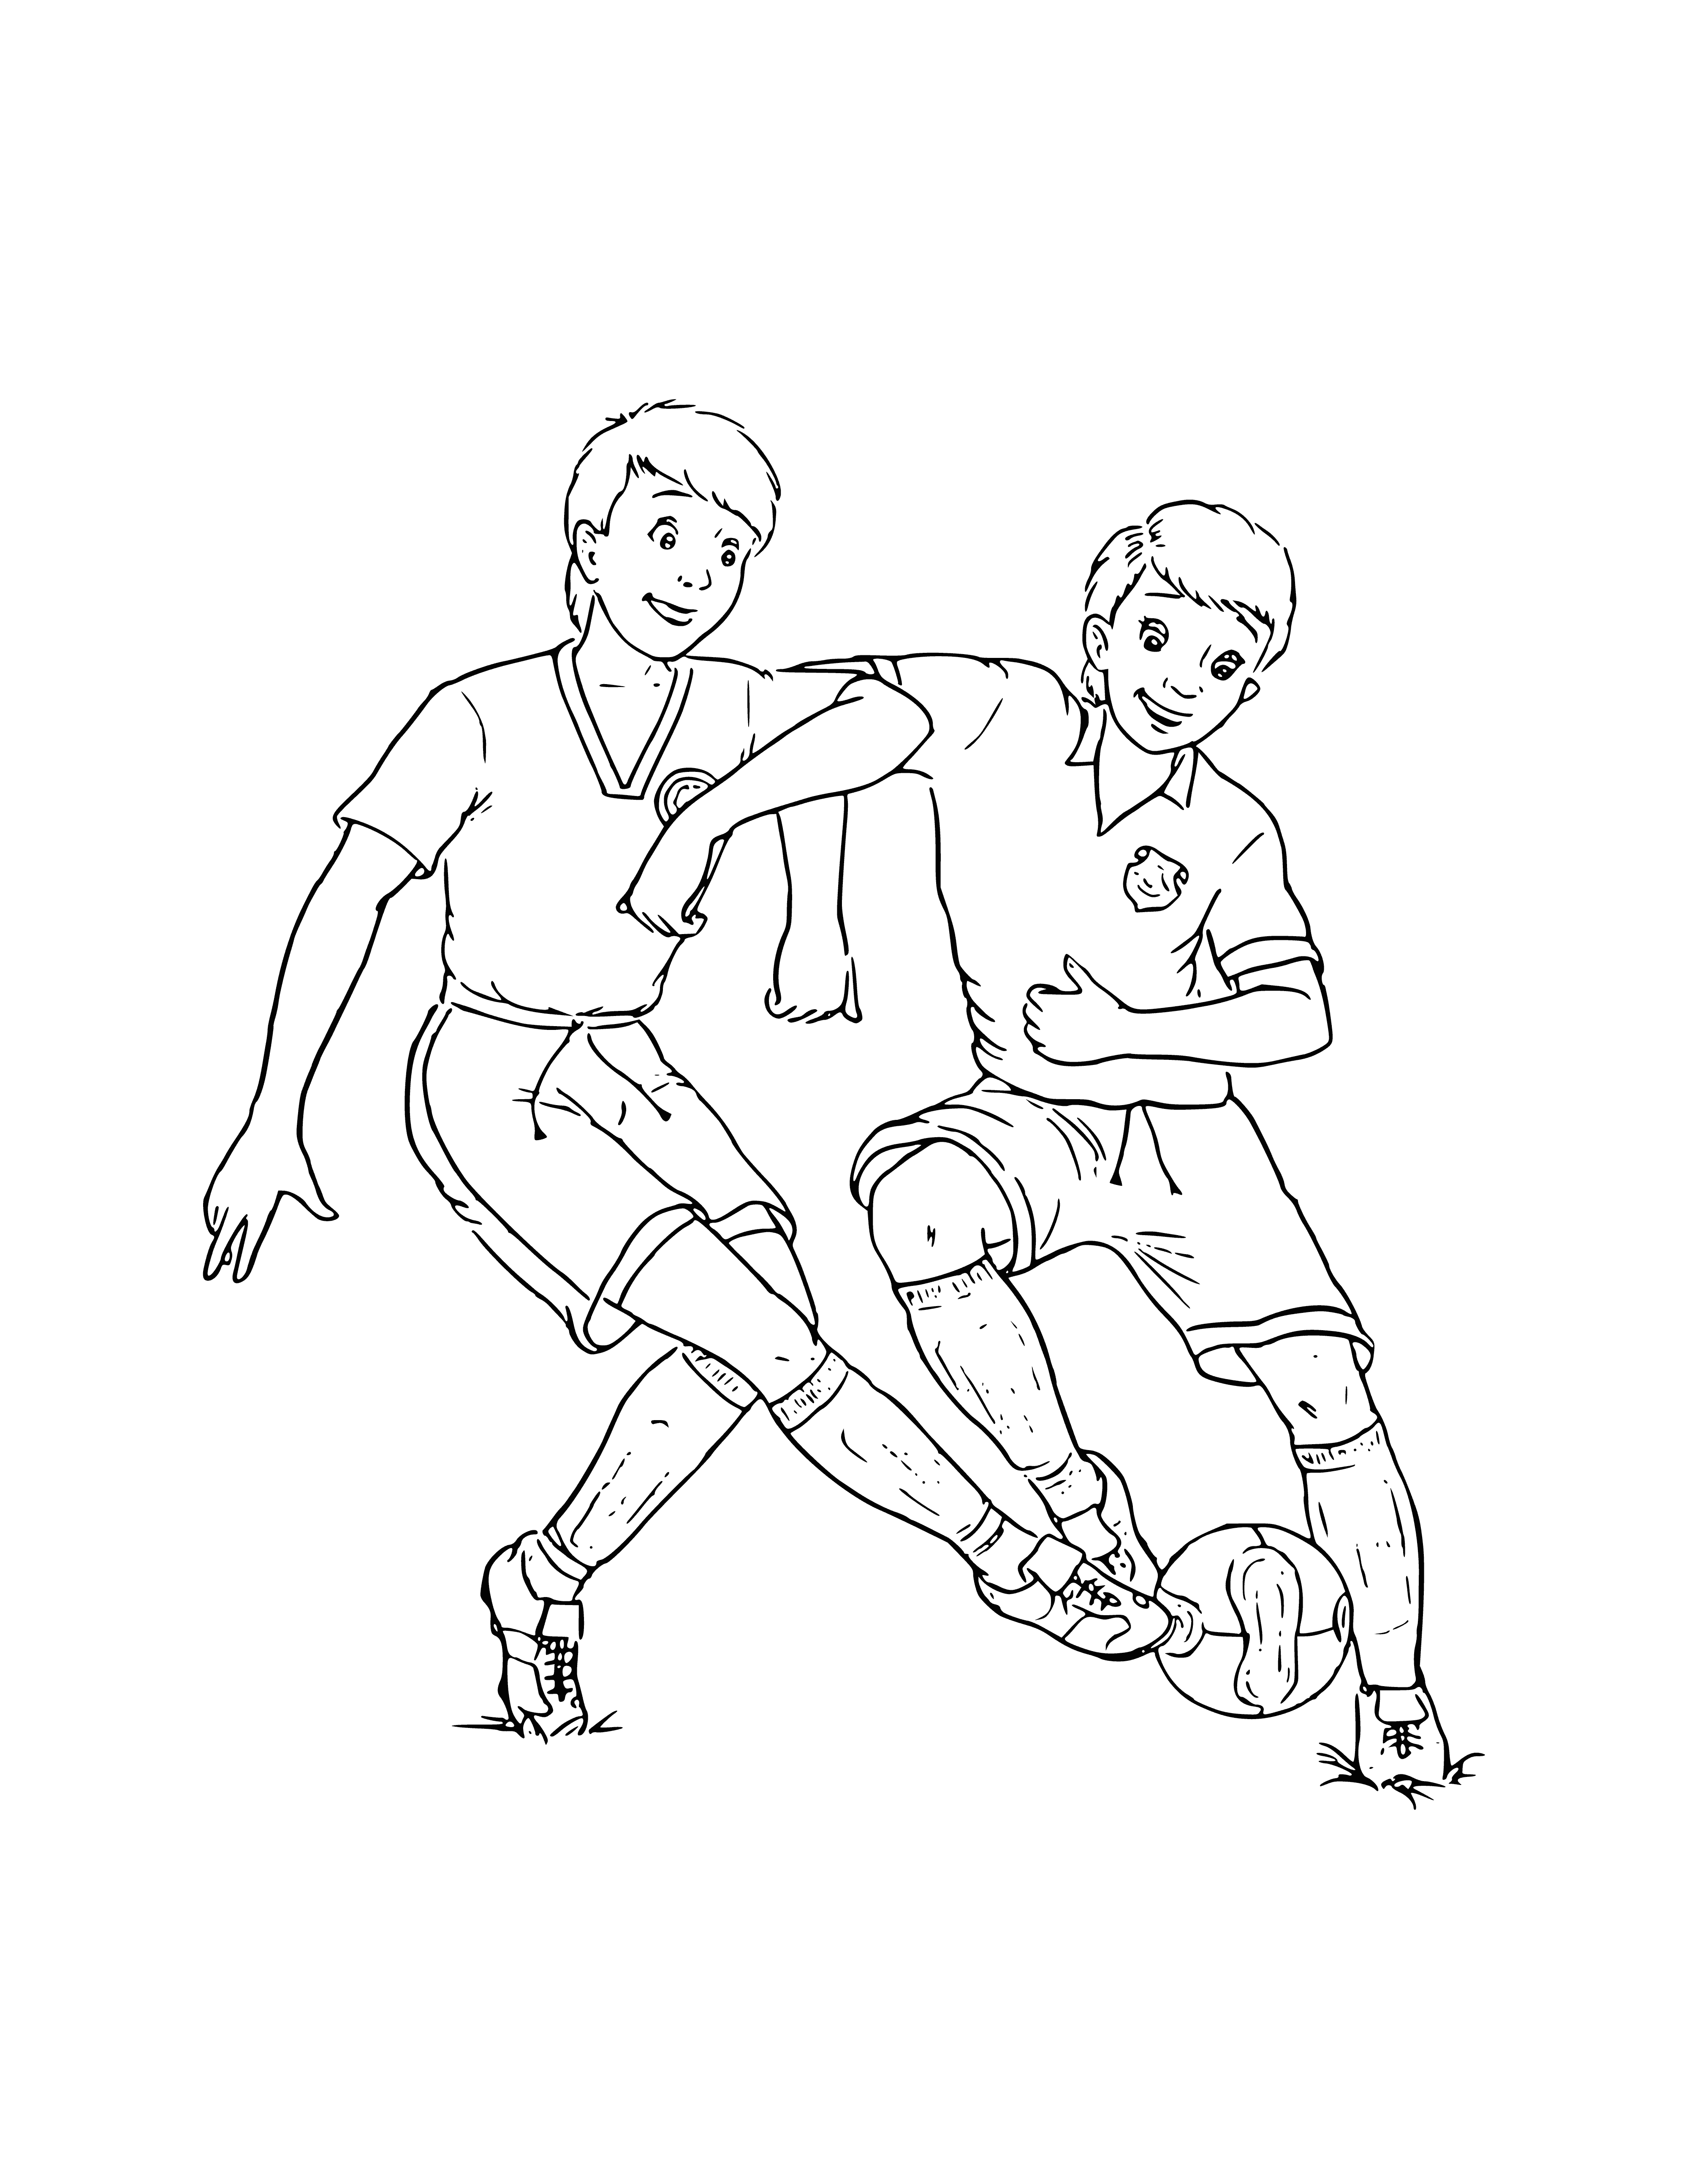 coloring page: Boy in football gear w/ determined look holding football, ready to make a play. #ReadySetPunt #FootballColoringPage